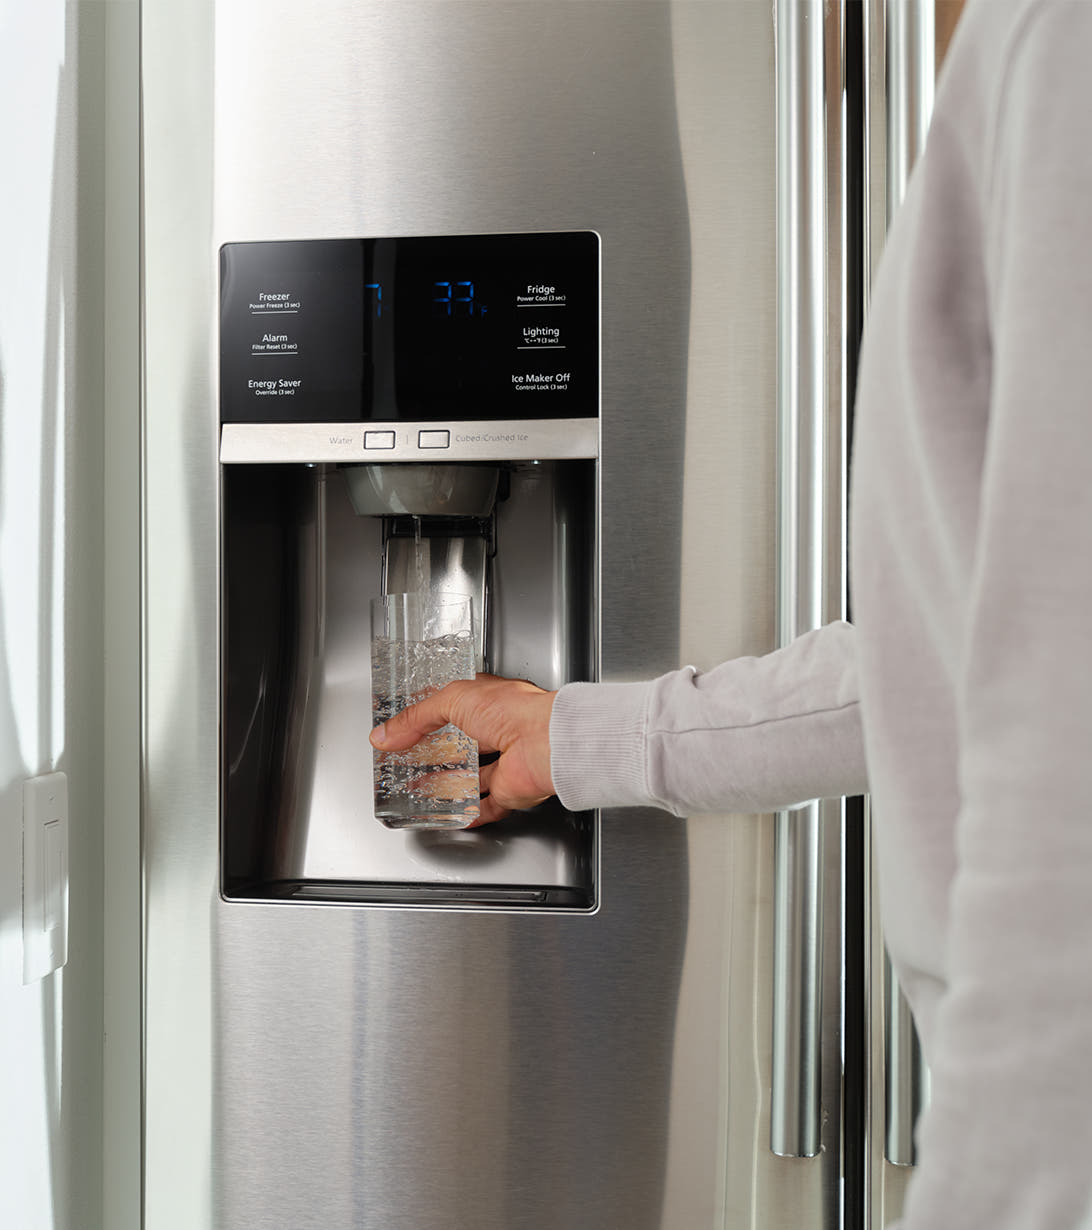 Experience superior filtration, from any fridge